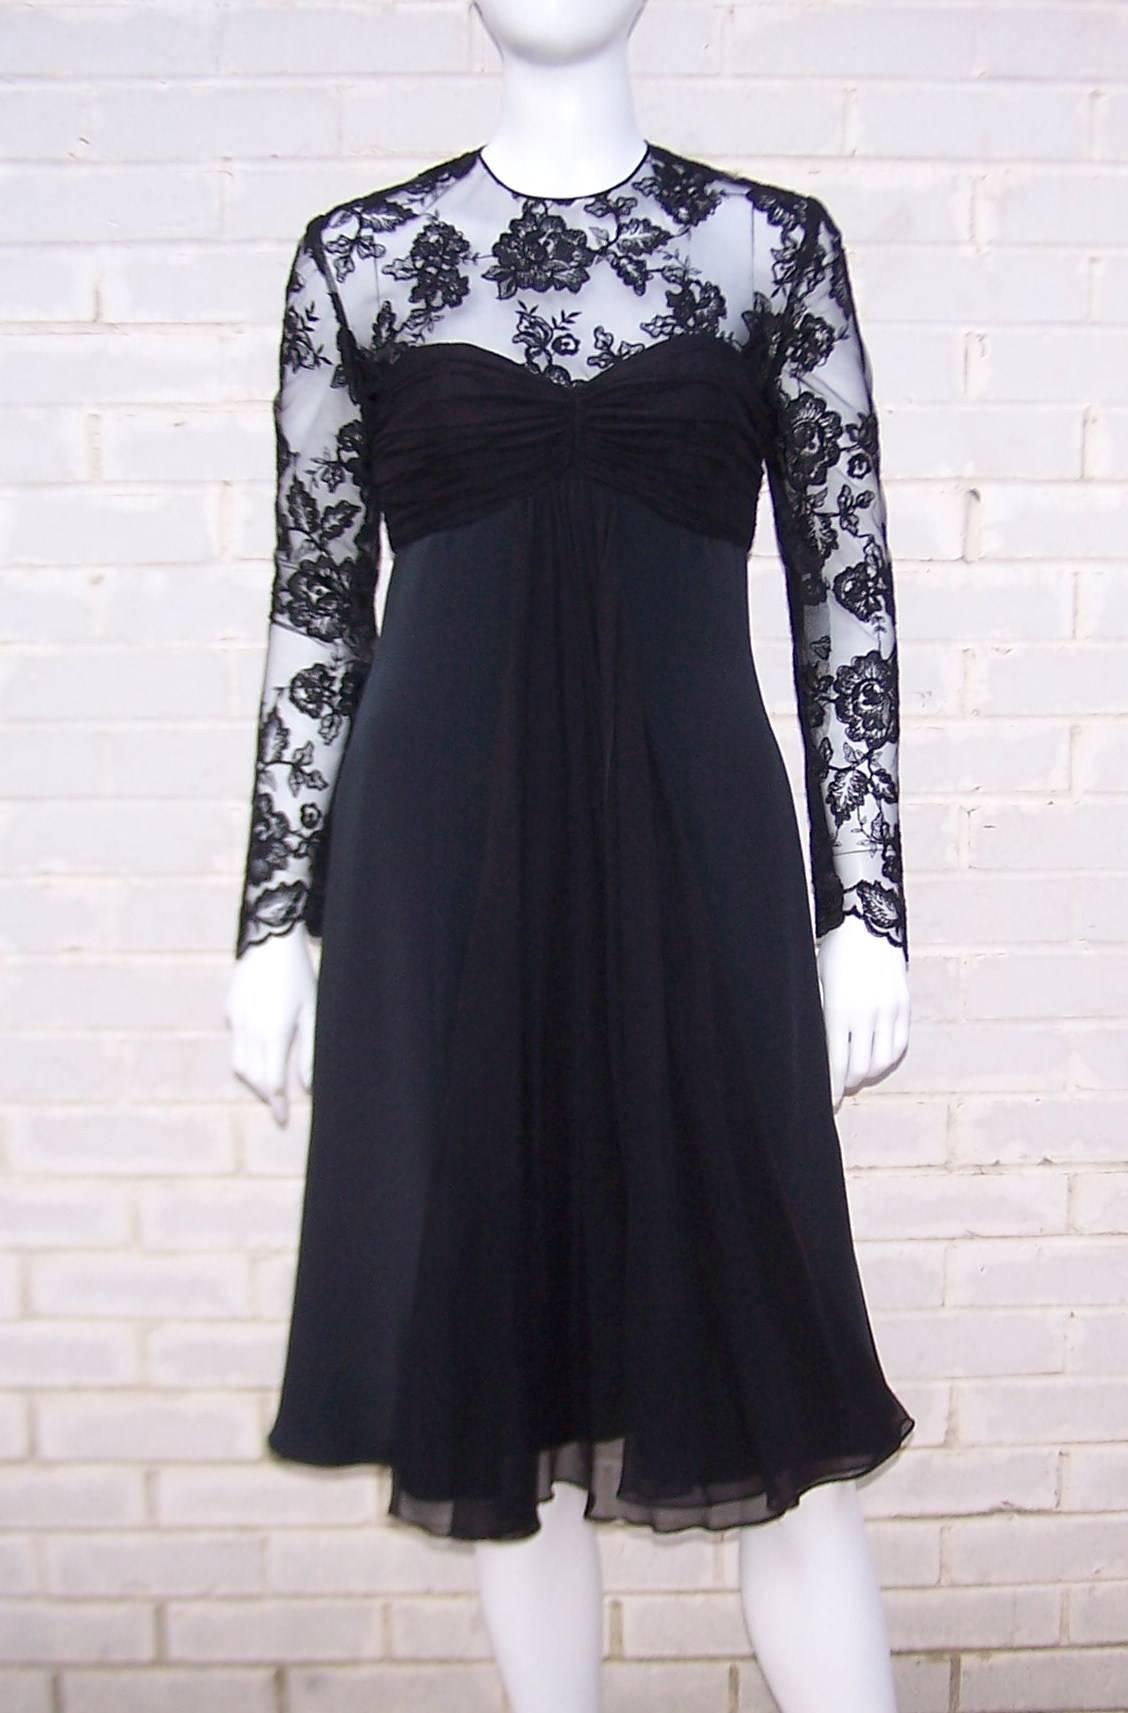 Oh the charm of a little black dress!  Every wardrobe needs a 'go to' dress for special occasions and this Adele Simpson black silk number never goes out of style.  It has just the right amount of details to give it something special though it is